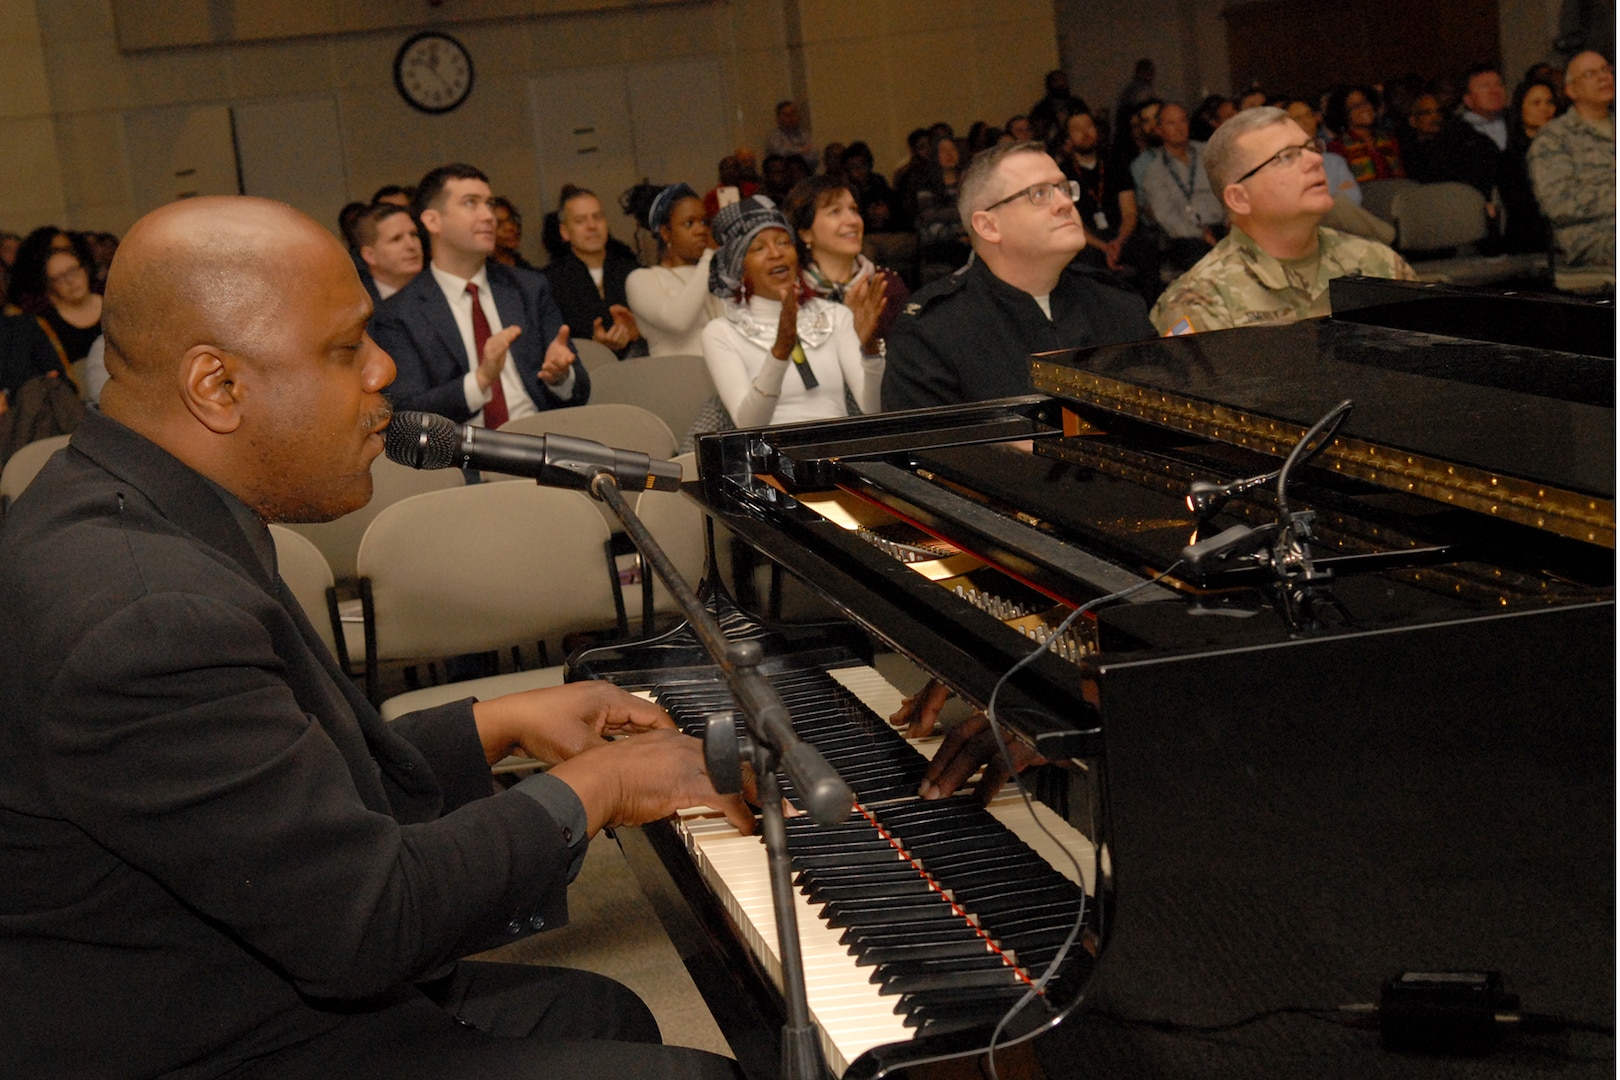 Key Arts Productions’ Joe Patterson (left foreground) plays piano and sings to accompany a video presentation of African-Americans in times of war at Defense Logistics Agency Troop Support in Philadelphia on Feb. 28.